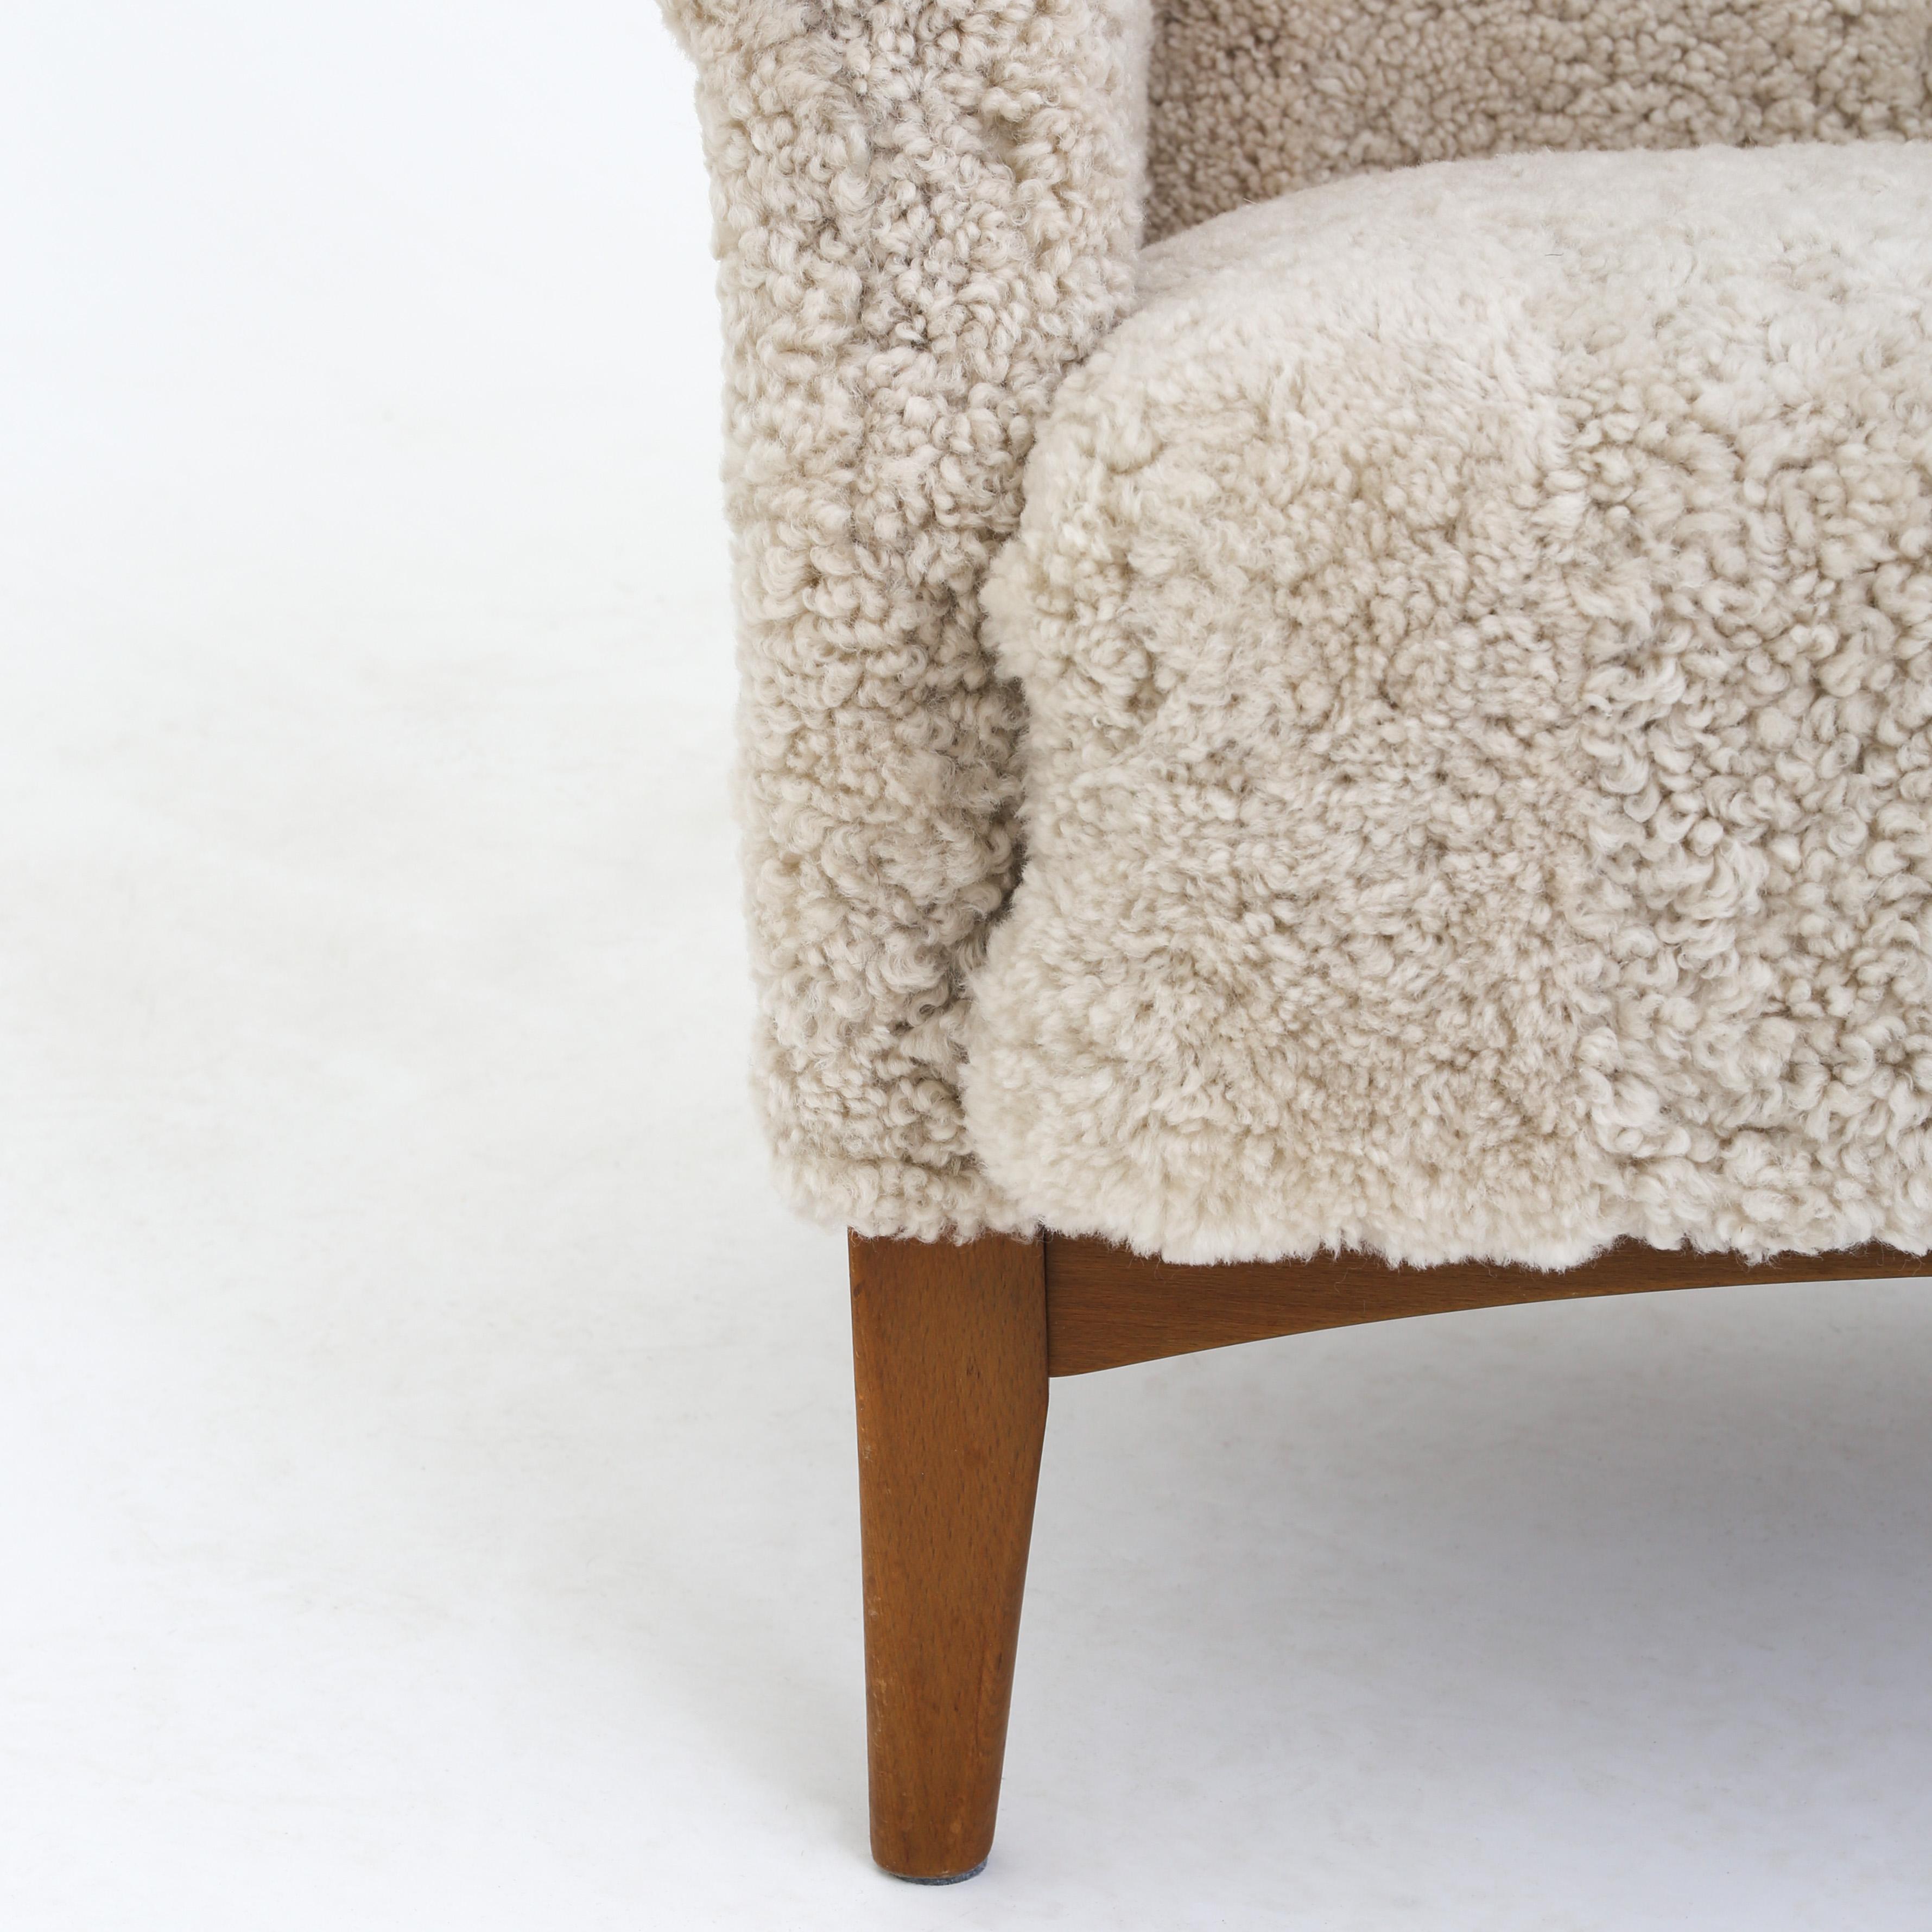 Fritz Hansen wingback chair (model FH 8023) in stained beech, reupholstered with Moonlight lamb's wool. Maker Fritz Hansen.